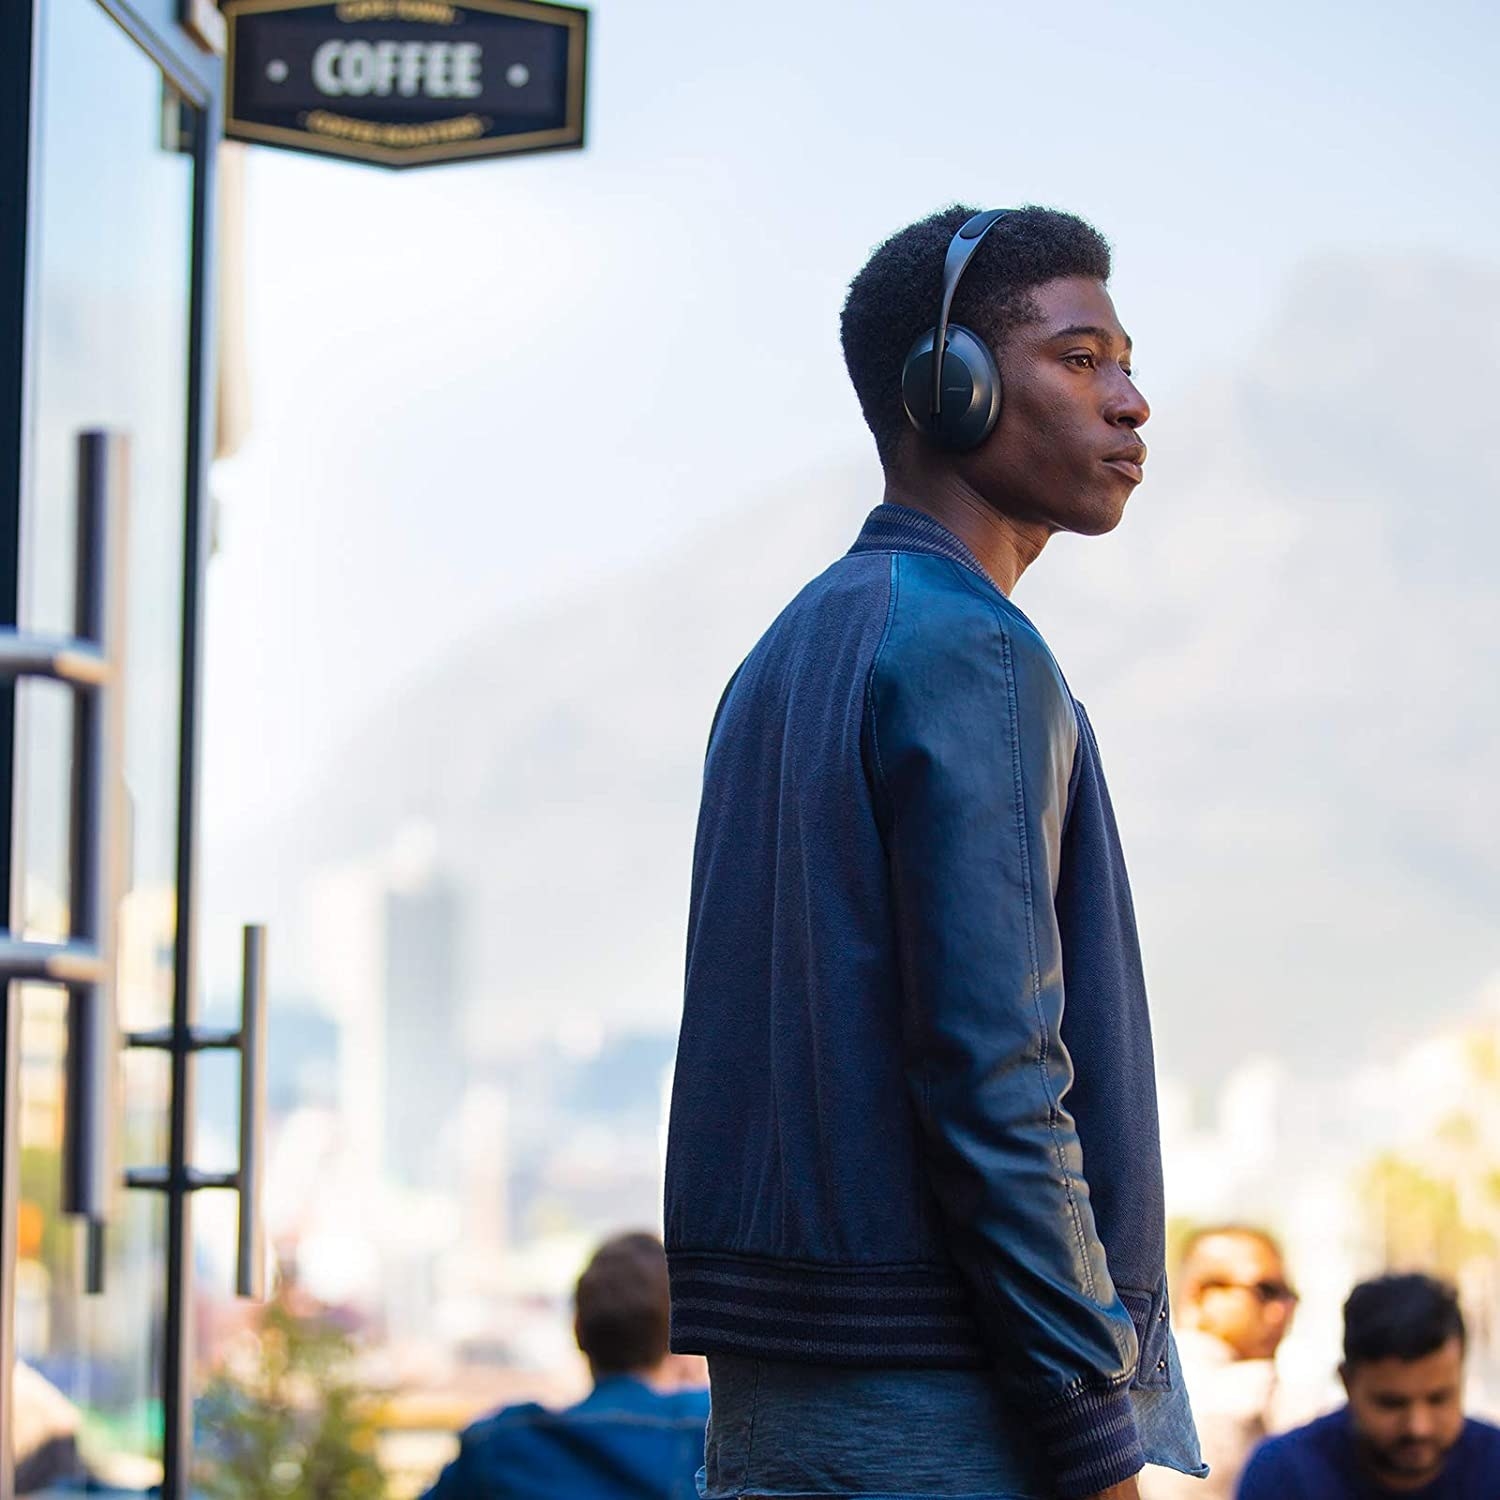 A stylish person wearing the headphones while walking on the street